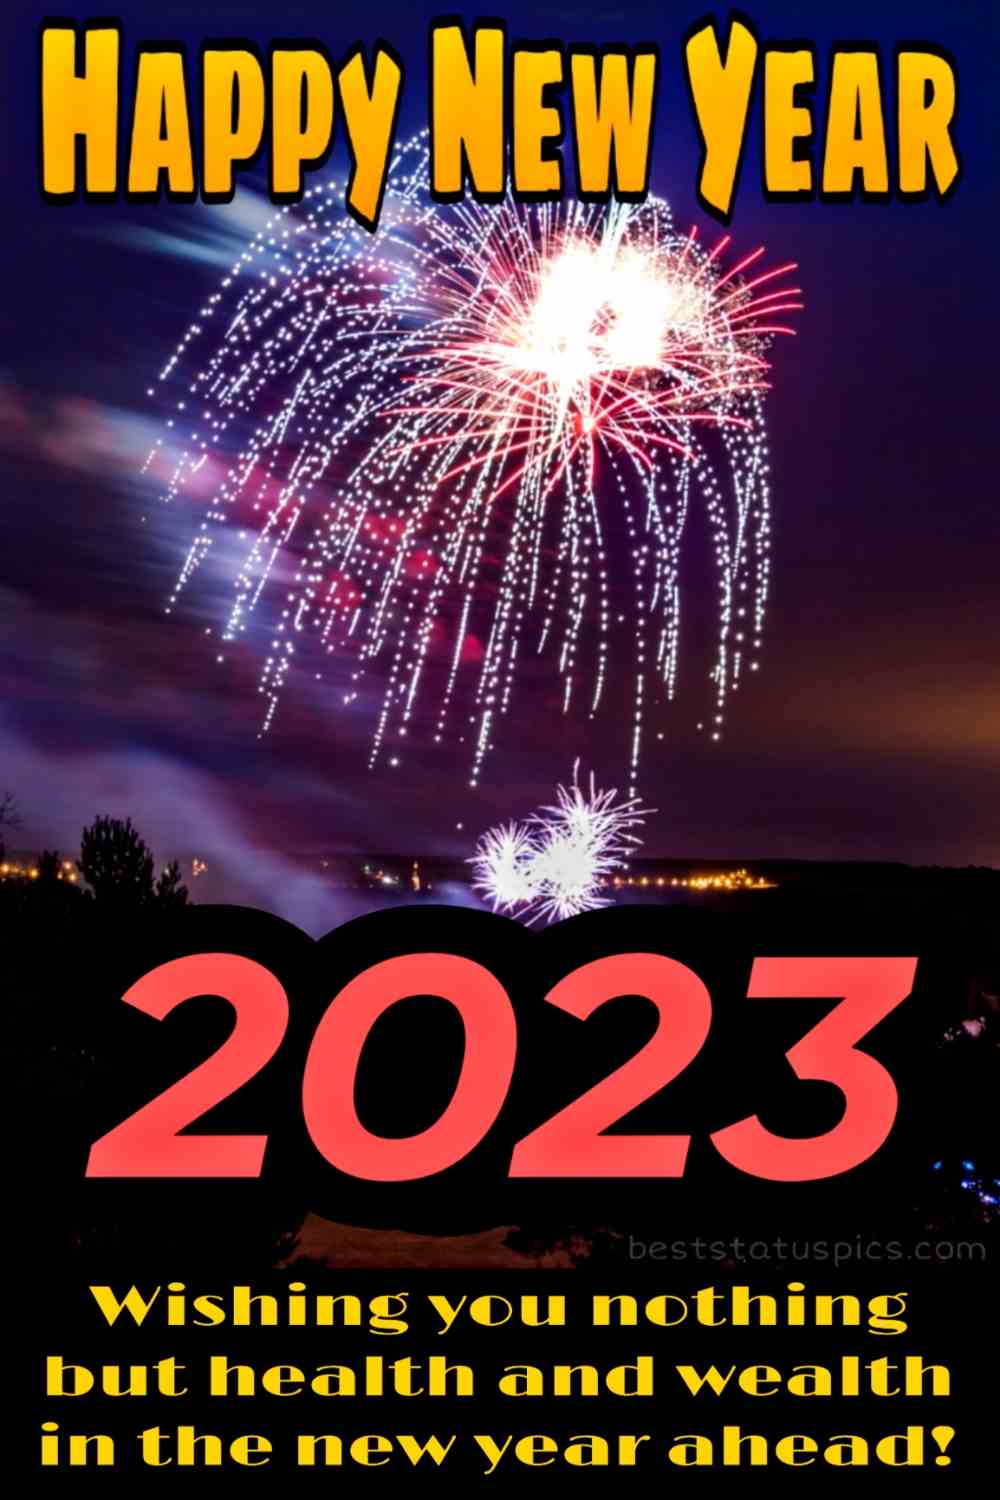 Happy new year 2022 wishes picture with quote for Instagram story